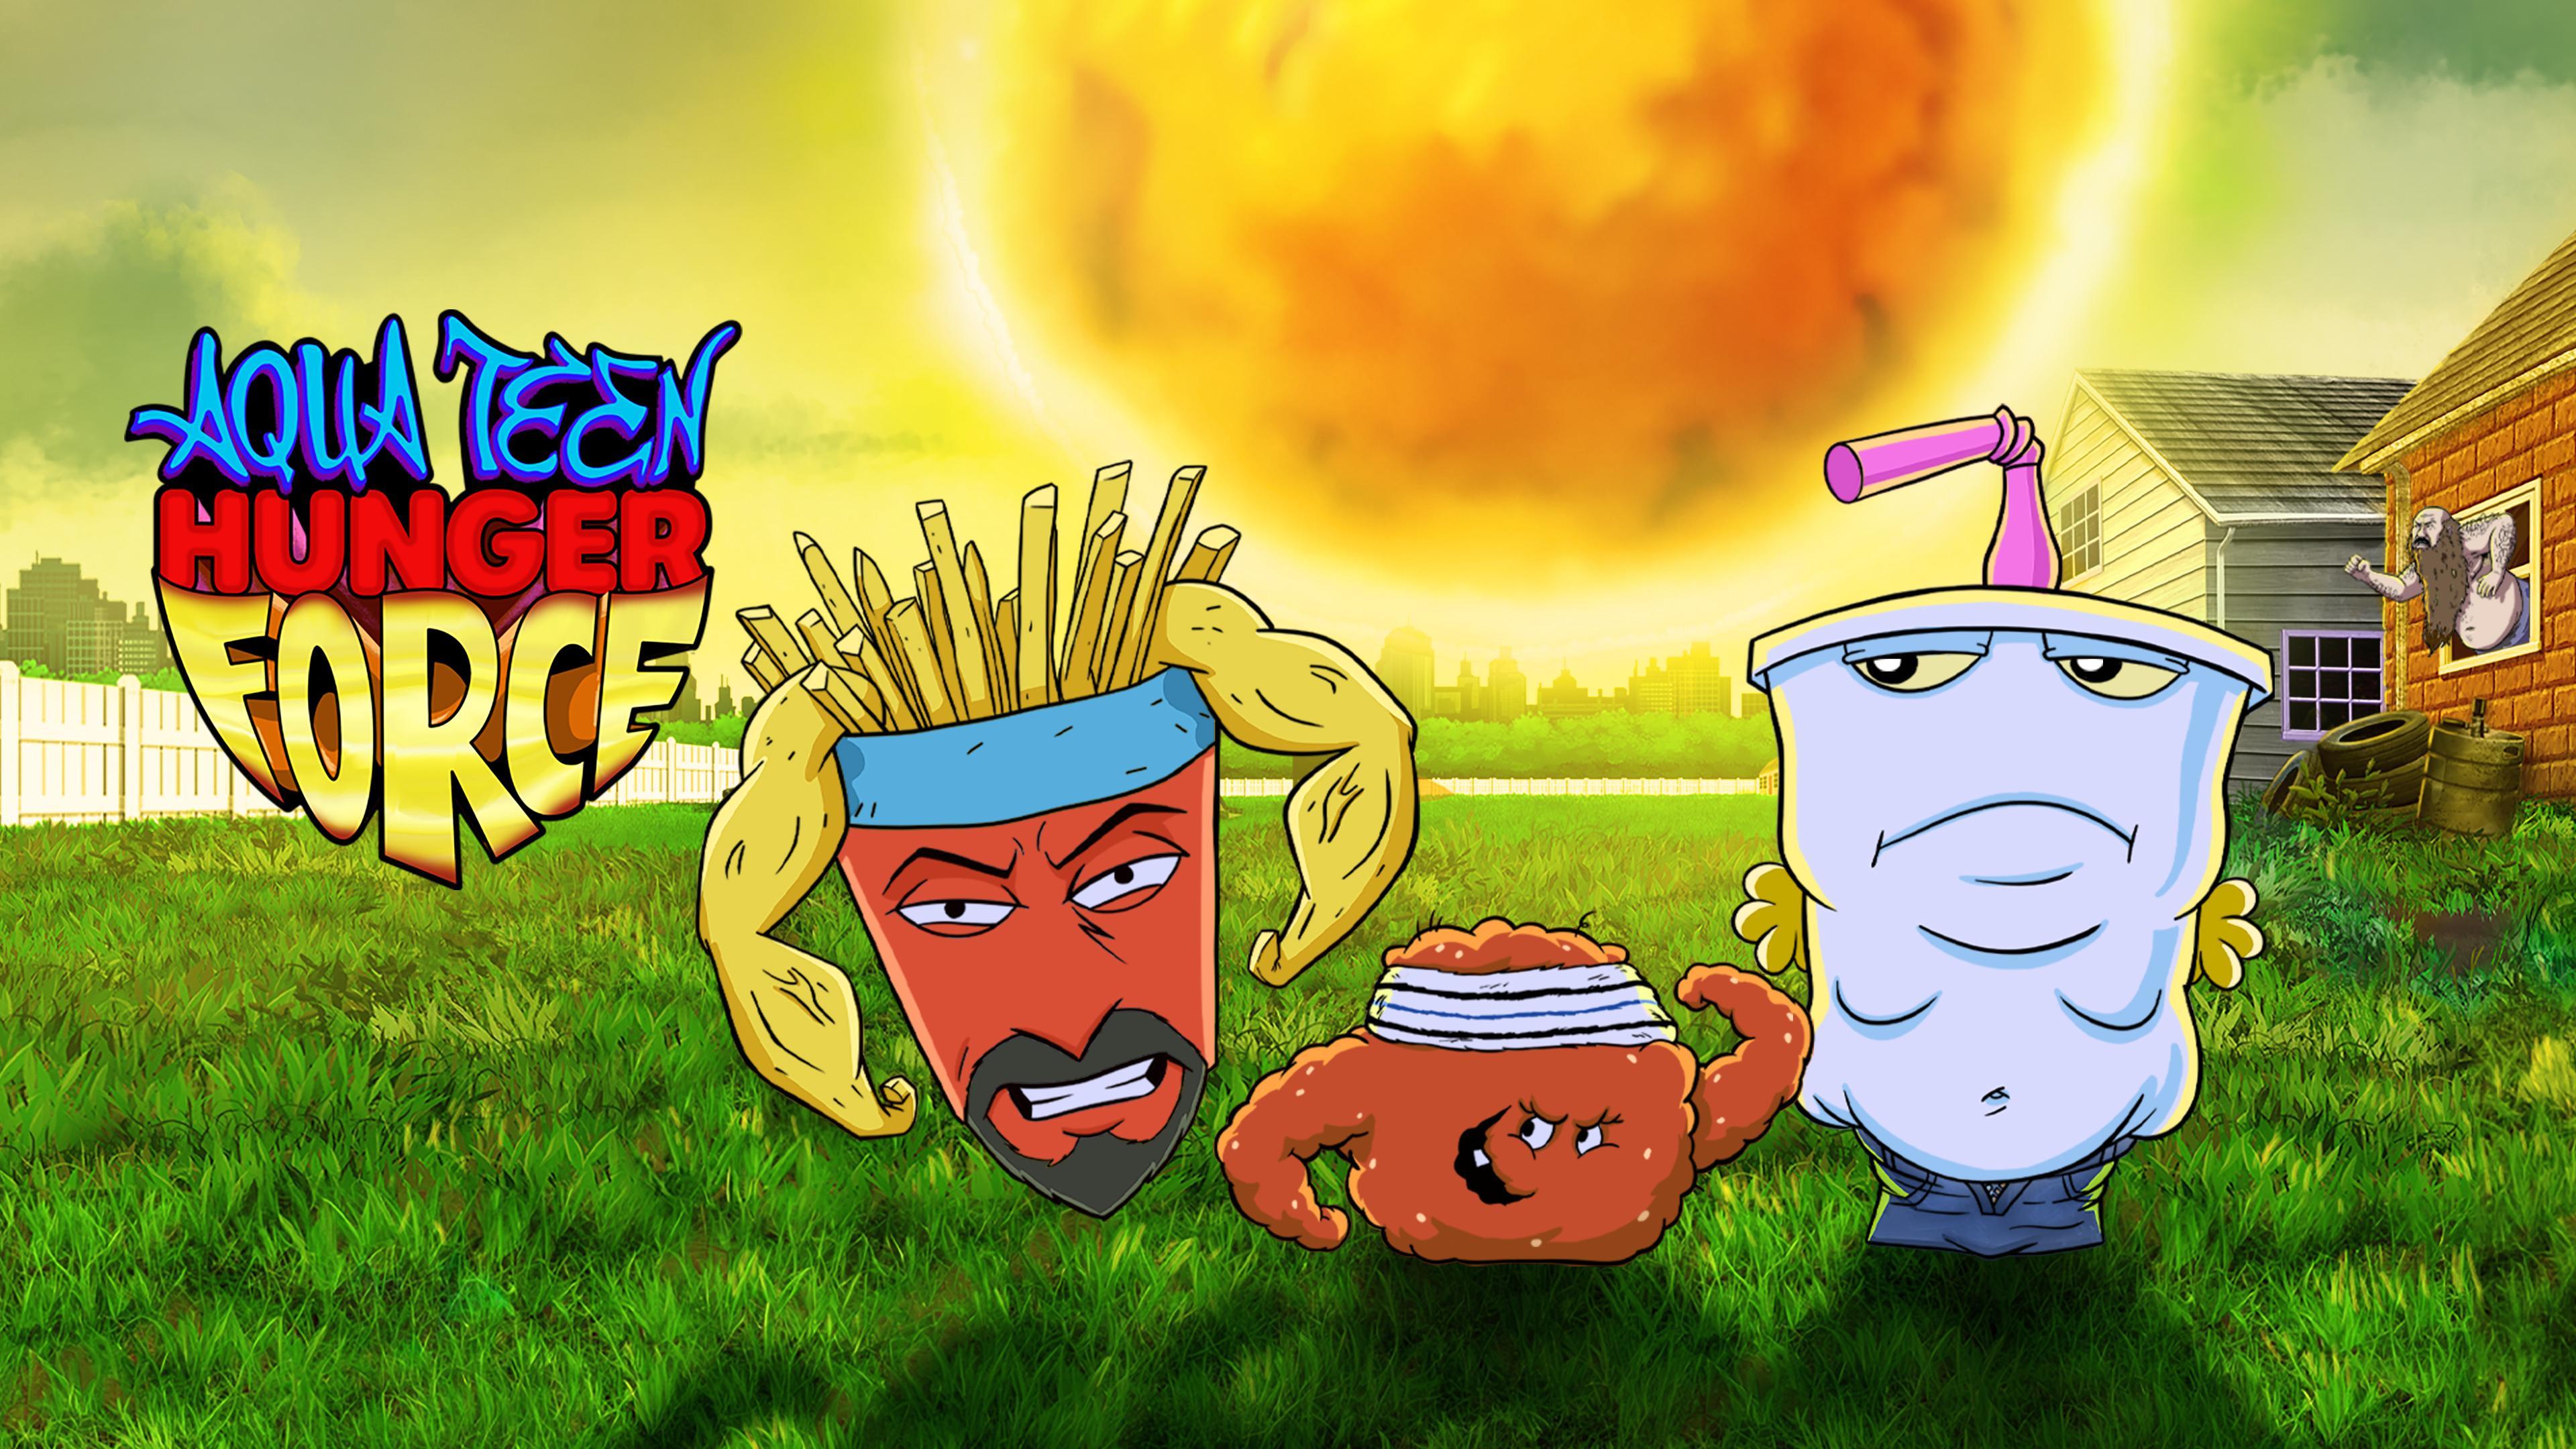 antonia pope recommends Aqua Teen Hunger Force Porn